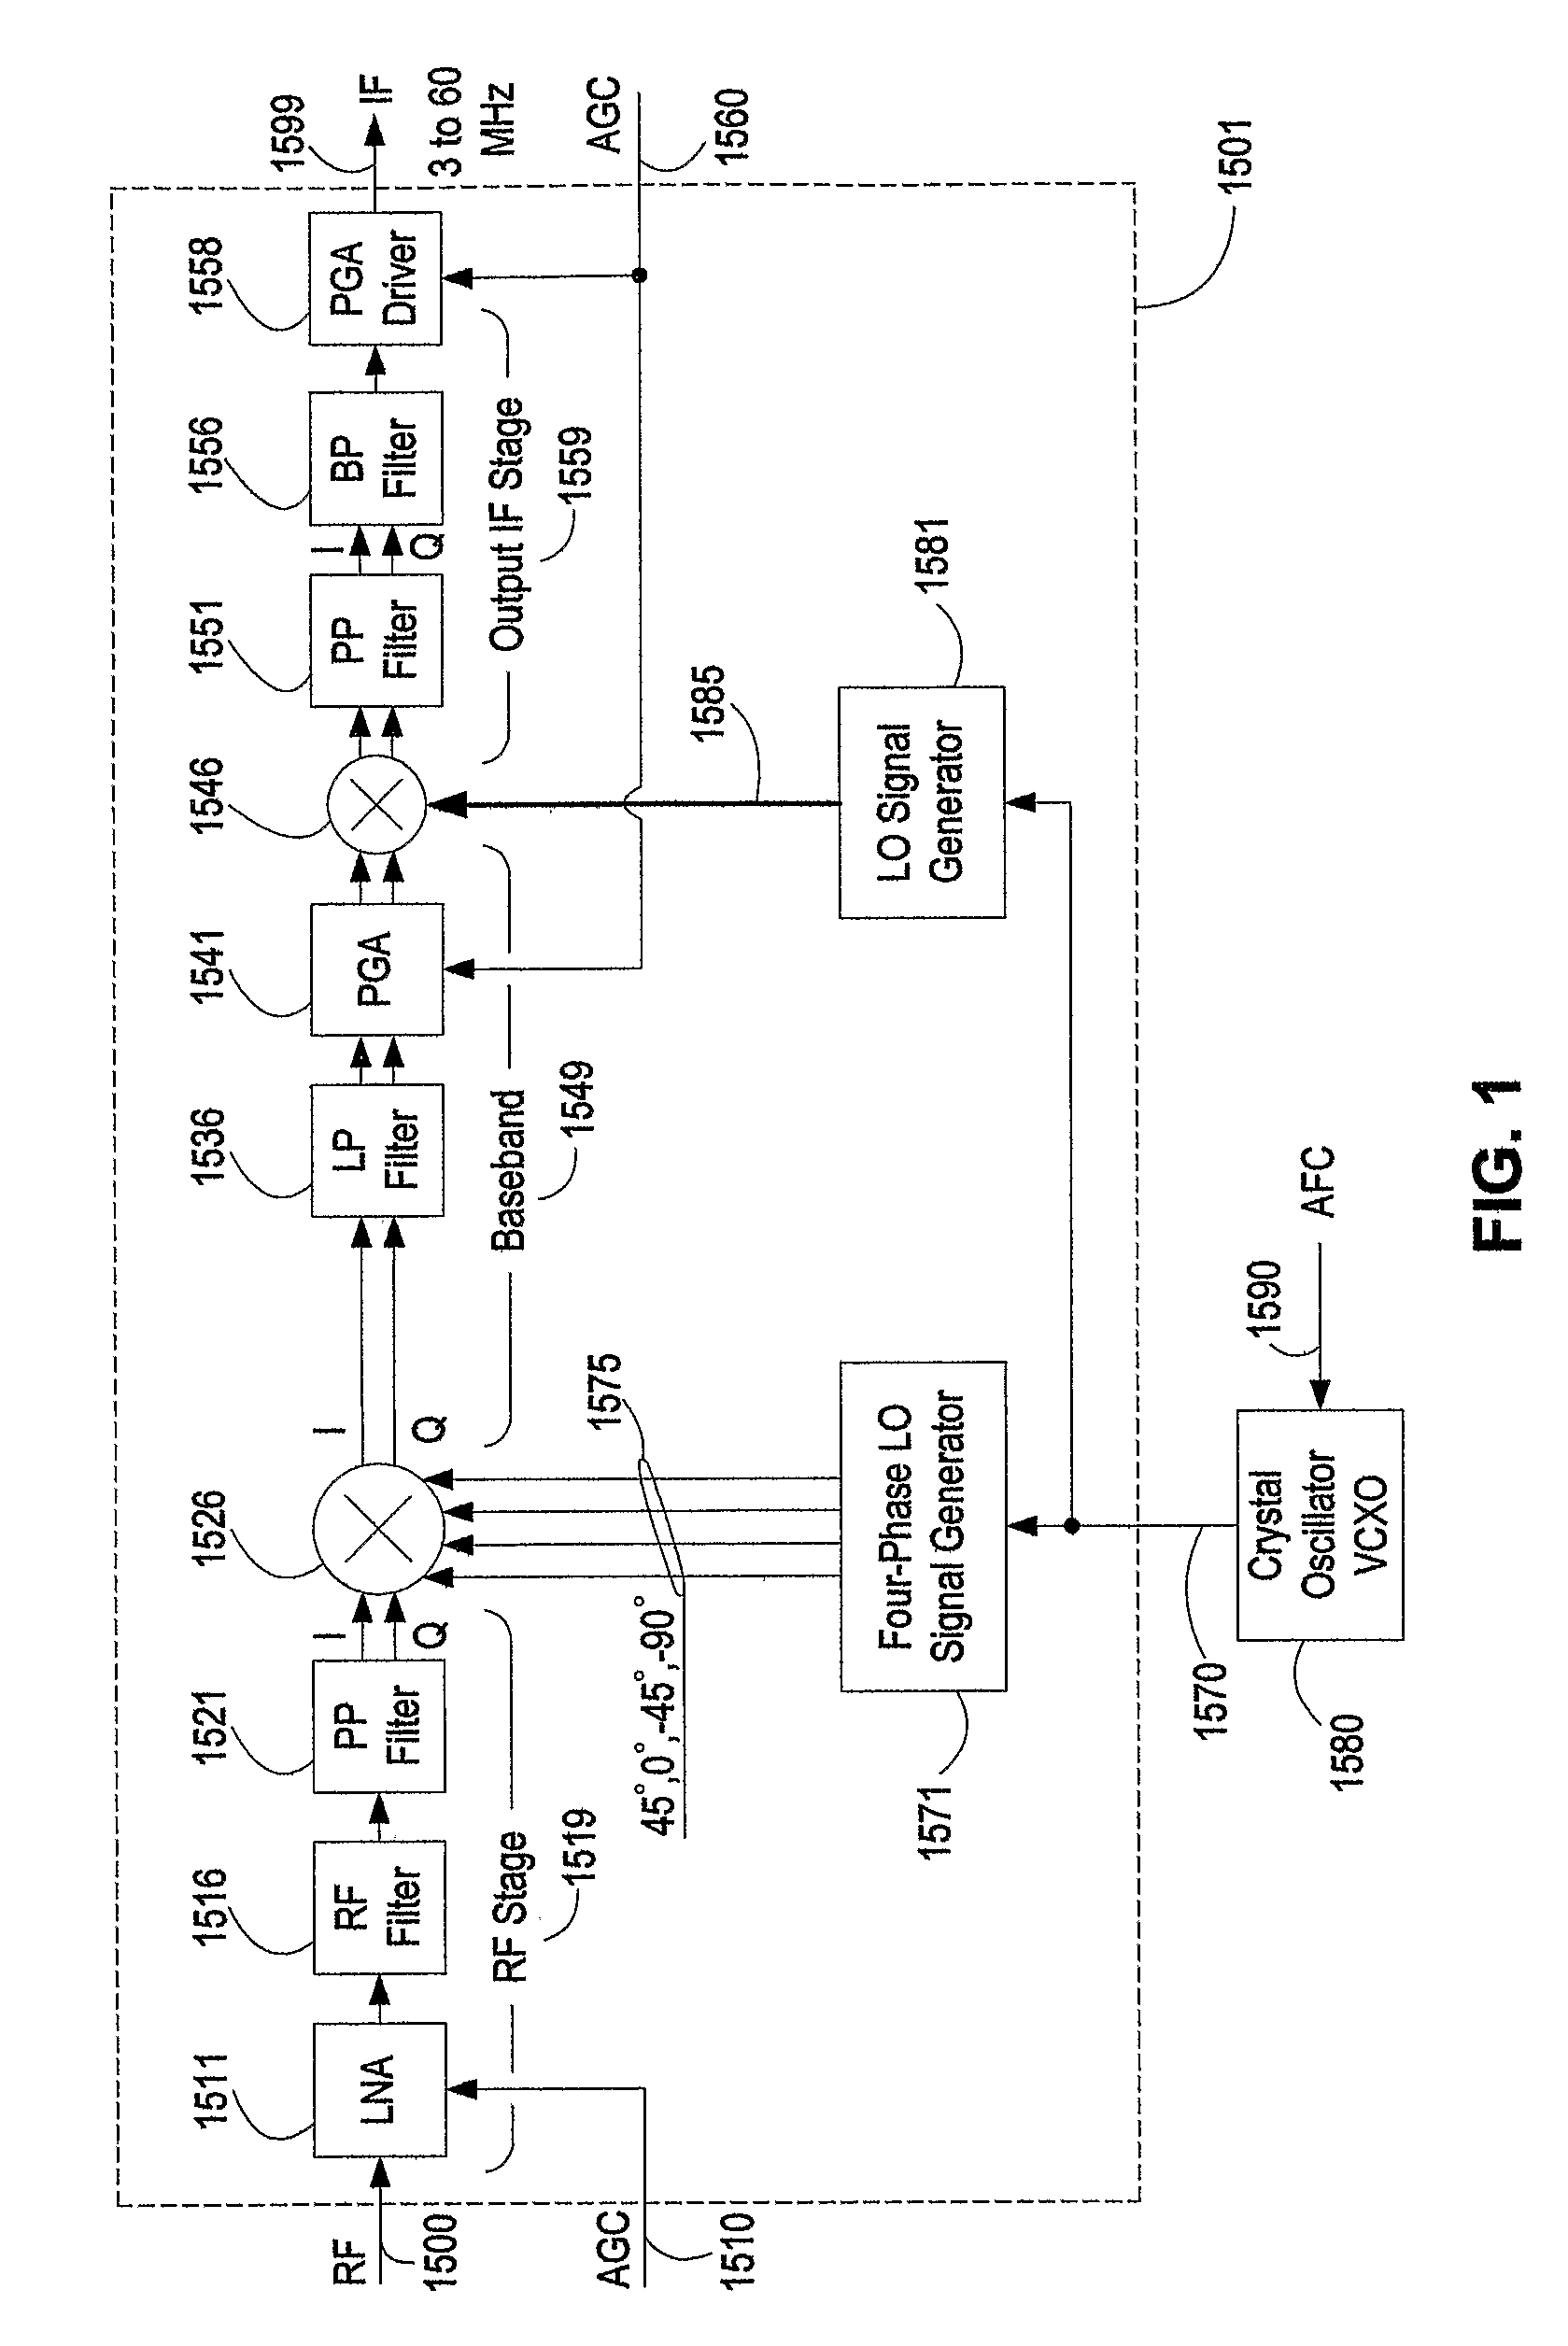 Integrated Tuner for Terrestrial and Cable Television